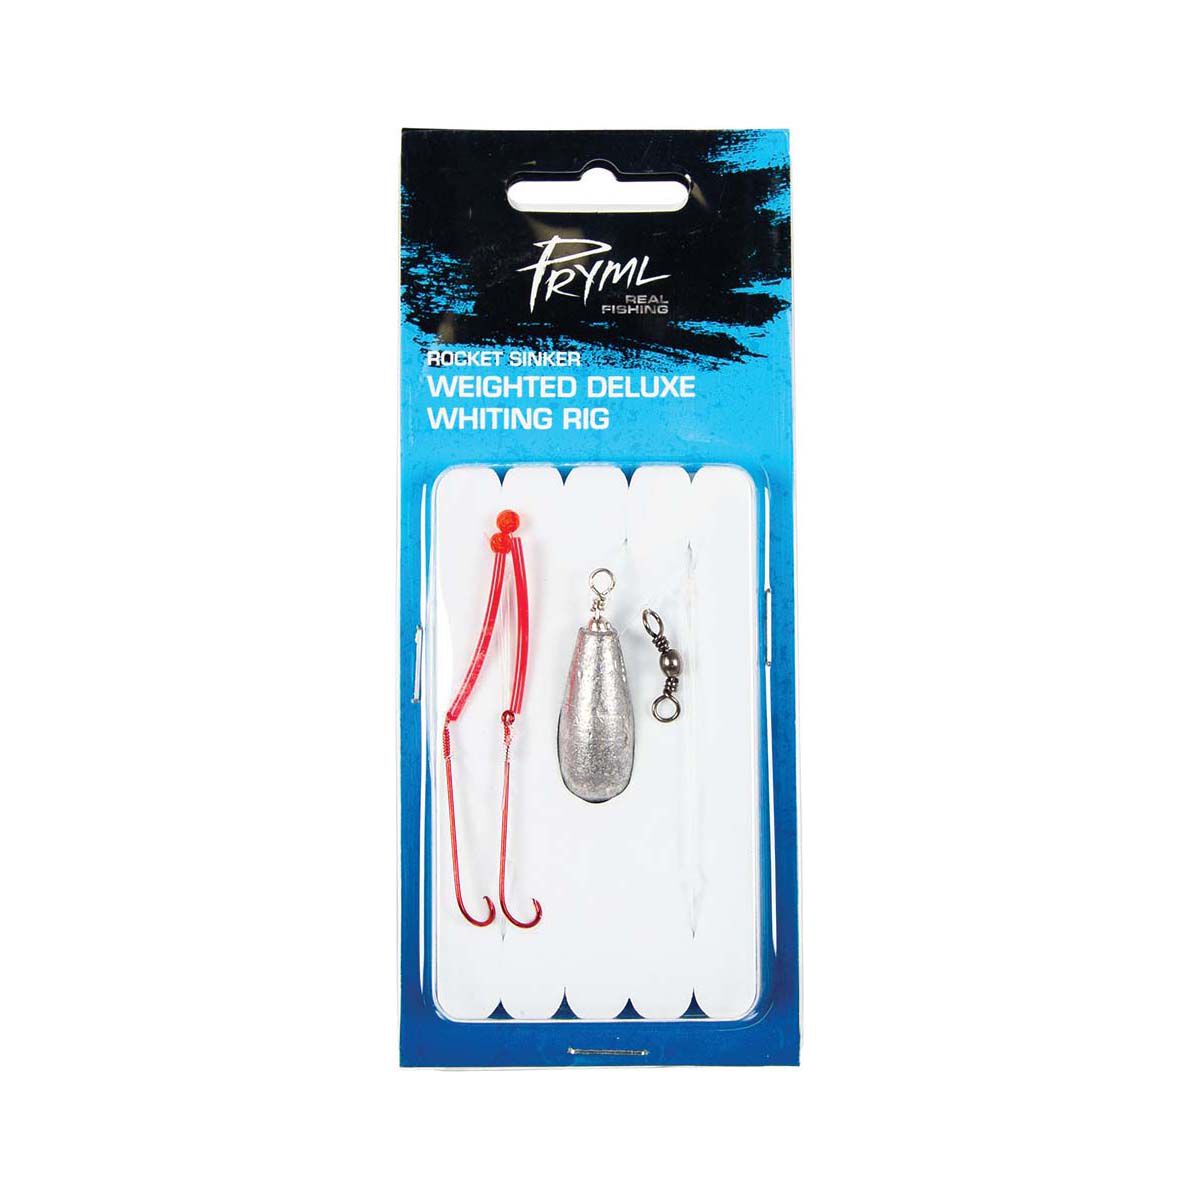 6 x Surecatch Pre-Tied Bream/Flathead Fishing Rig with Chemically Sharpened  Hooks [Hook Size: 4]